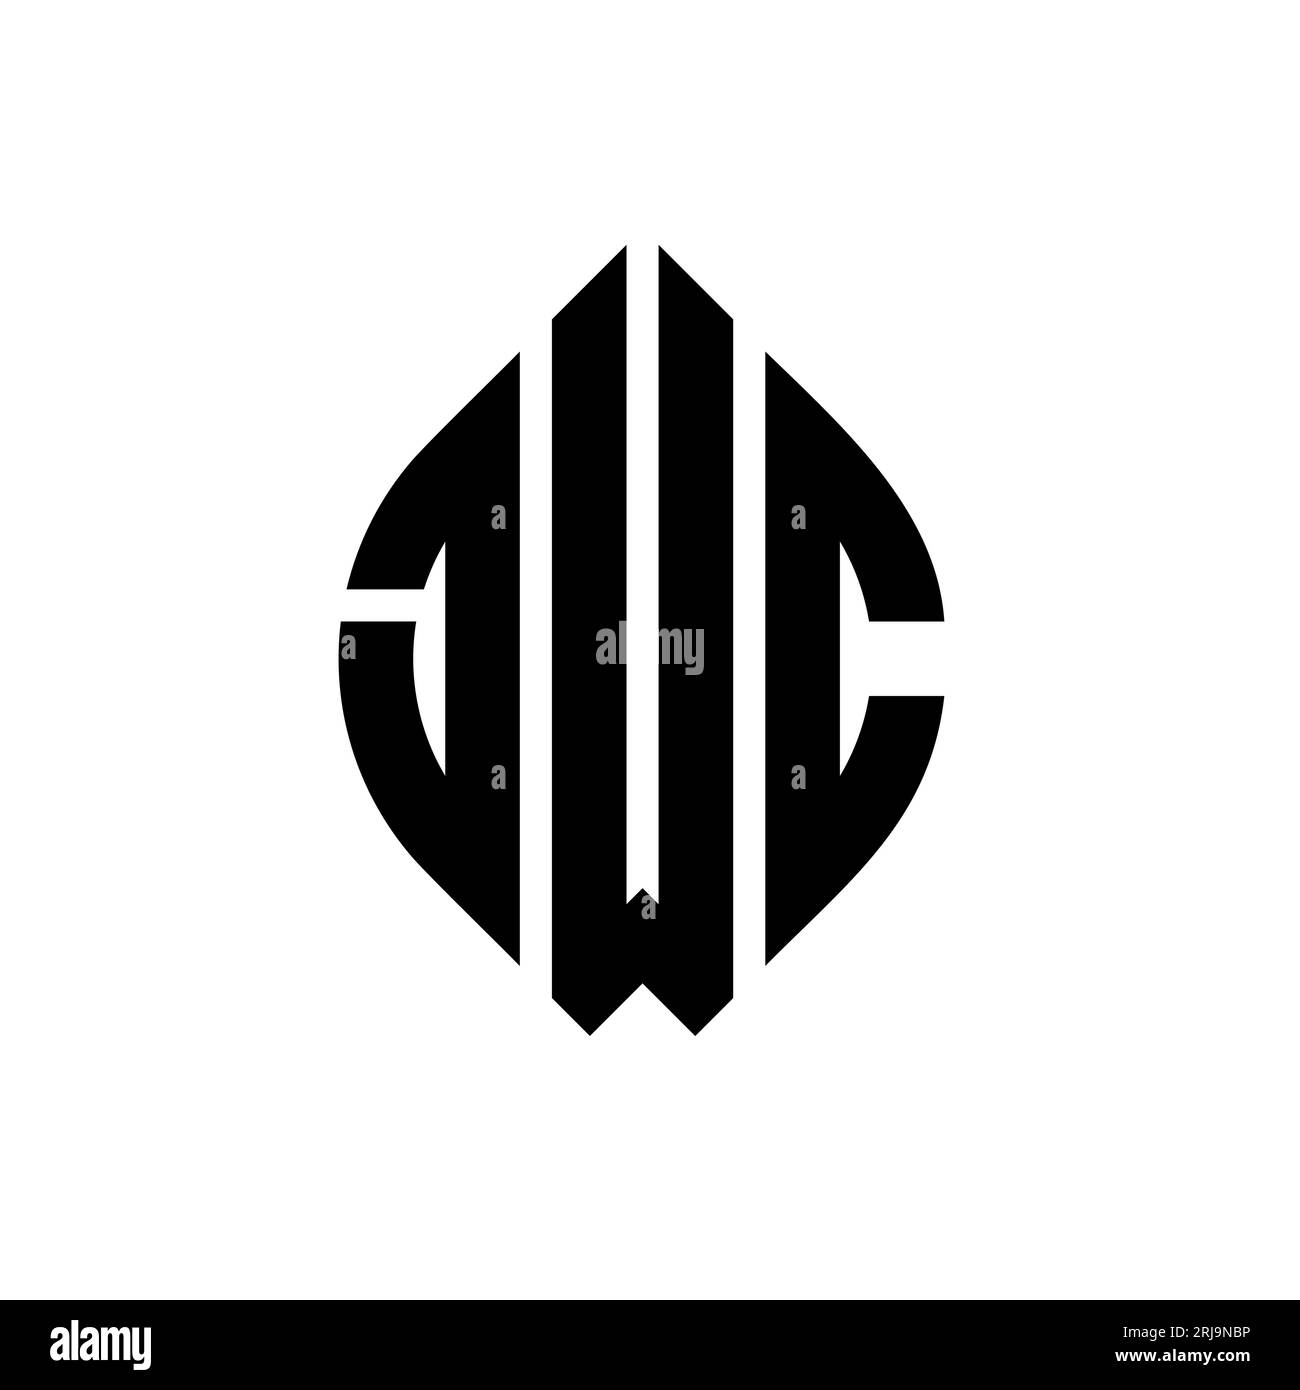 JWC circle letter logo design with circle and ellipse shape. JWC ellipse letters with typographic style. The three initials form a circle logo. JWC Ci Stock Vector